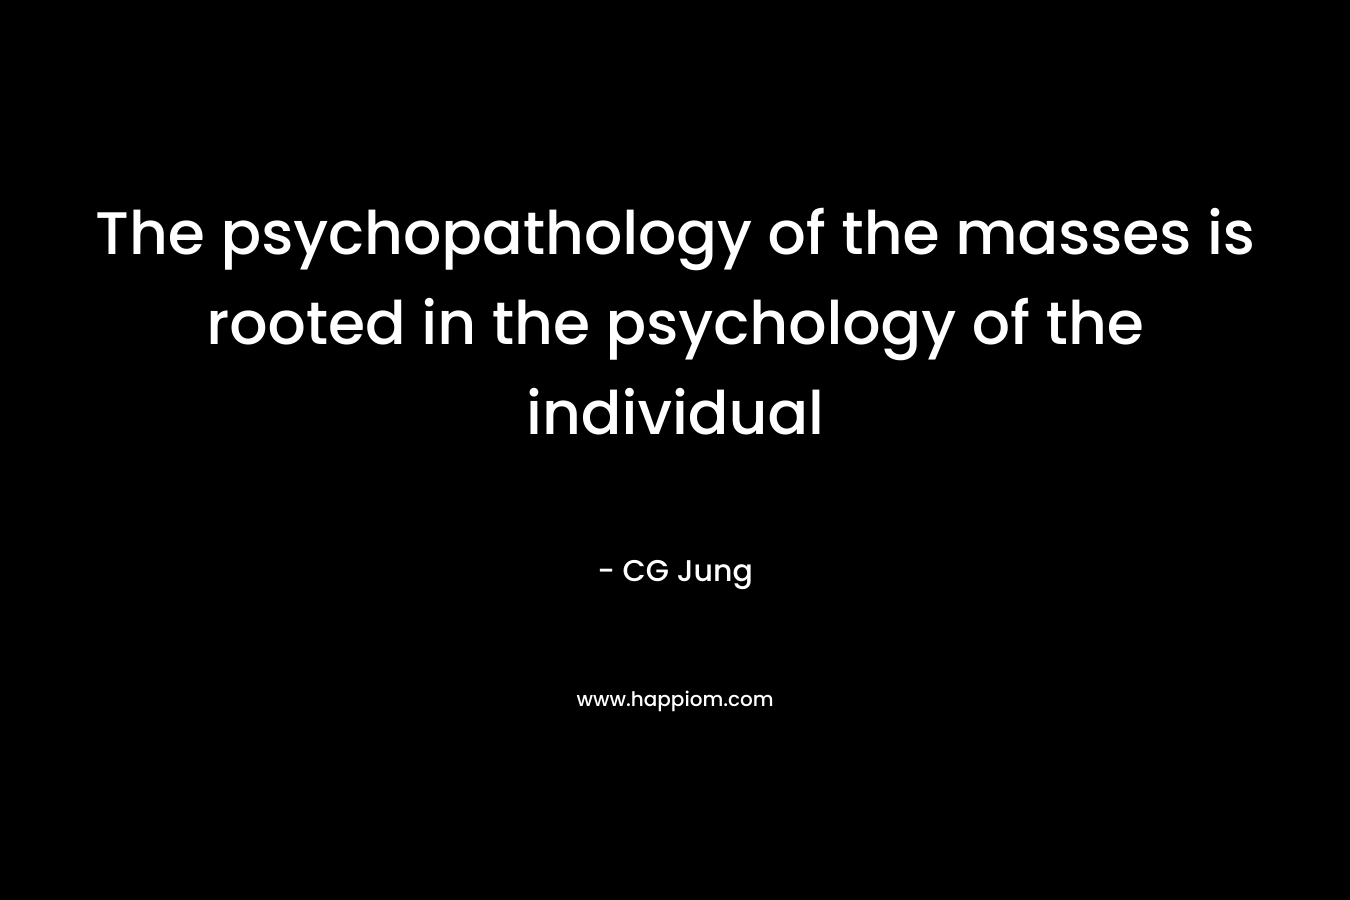 The psychopathology of the masses is rooted in the psychology of the individual